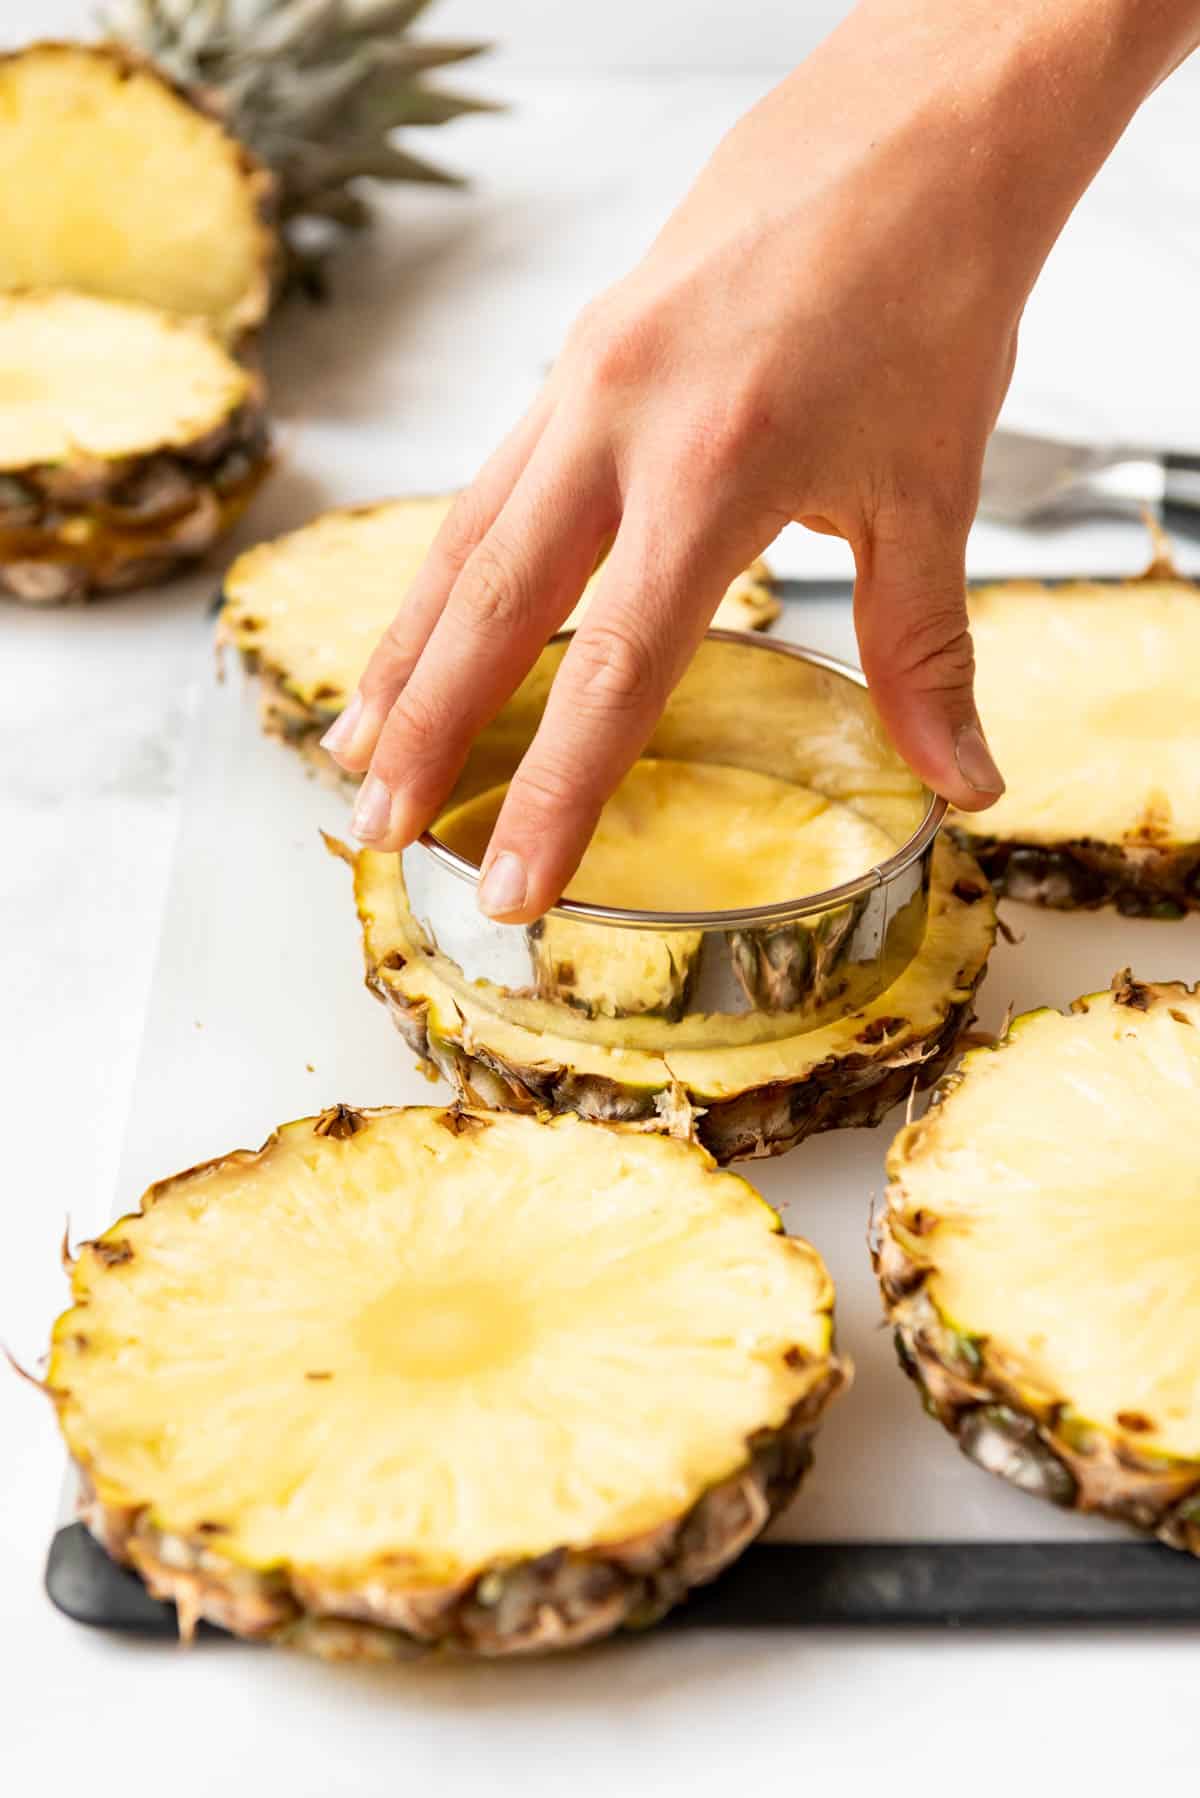 A hand pressing a large circular metal cutter to cut out a pineapple ring from a slice of fresh pineapple.